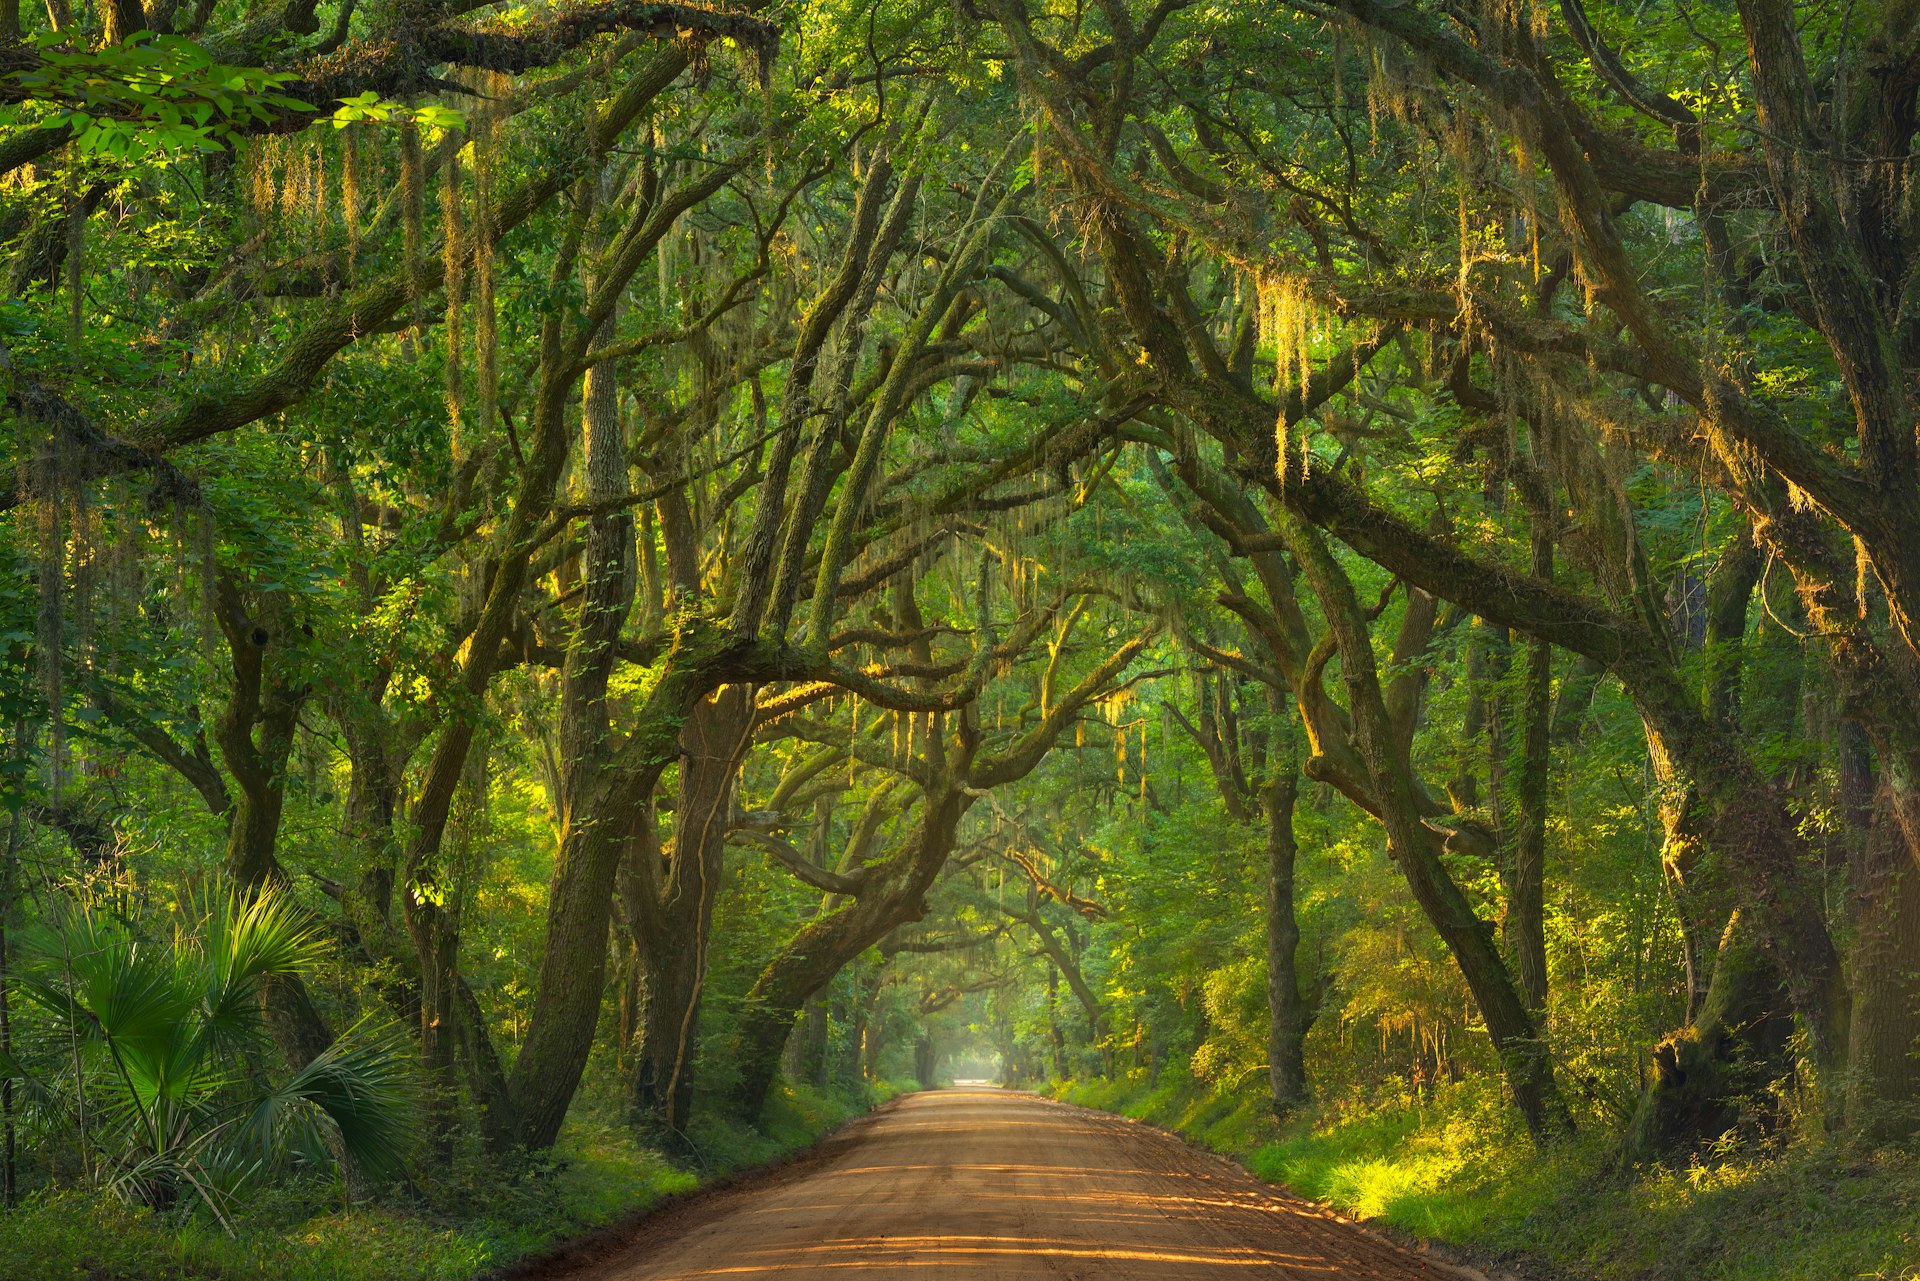 A road lined with trees that are drooping over at each side and meeting in the middle to form a green tunnel